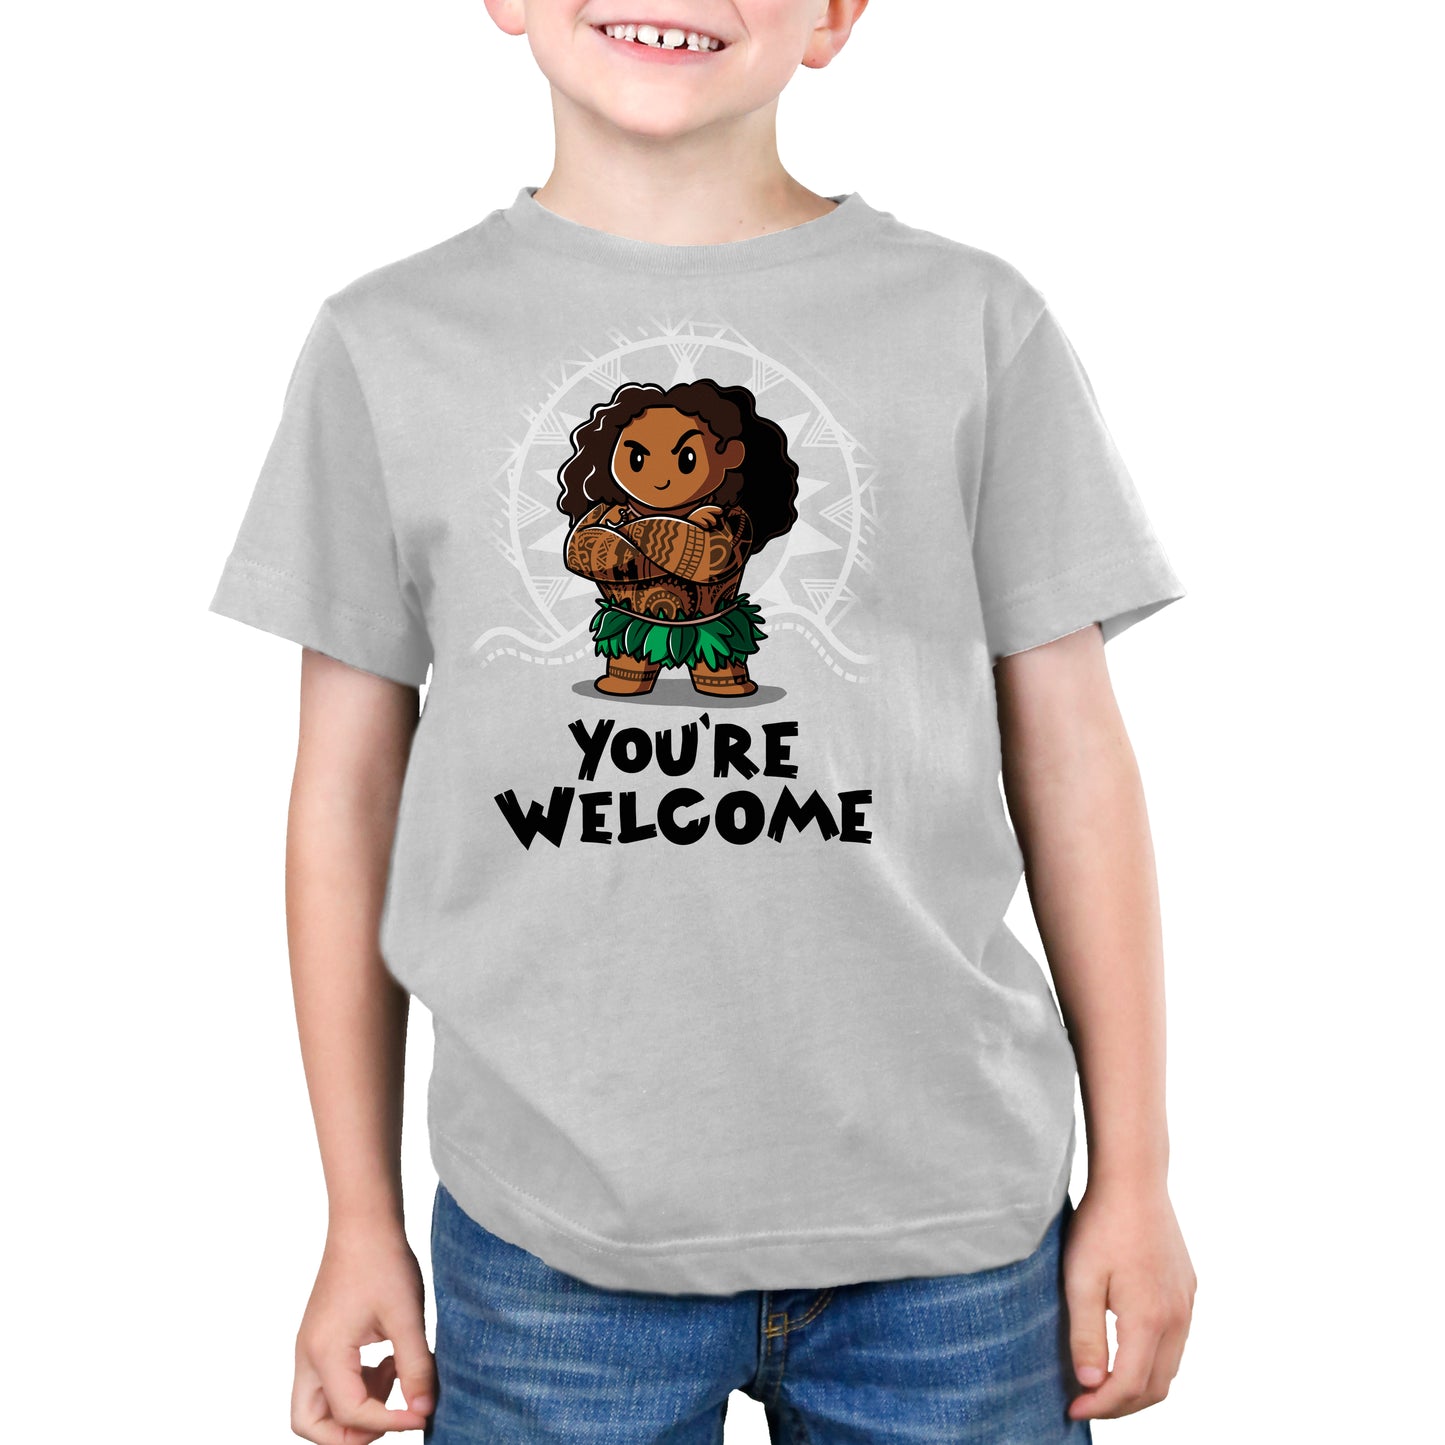 A boy wearing a Disney T-shirt inspired by Moana says "You're Welcome.